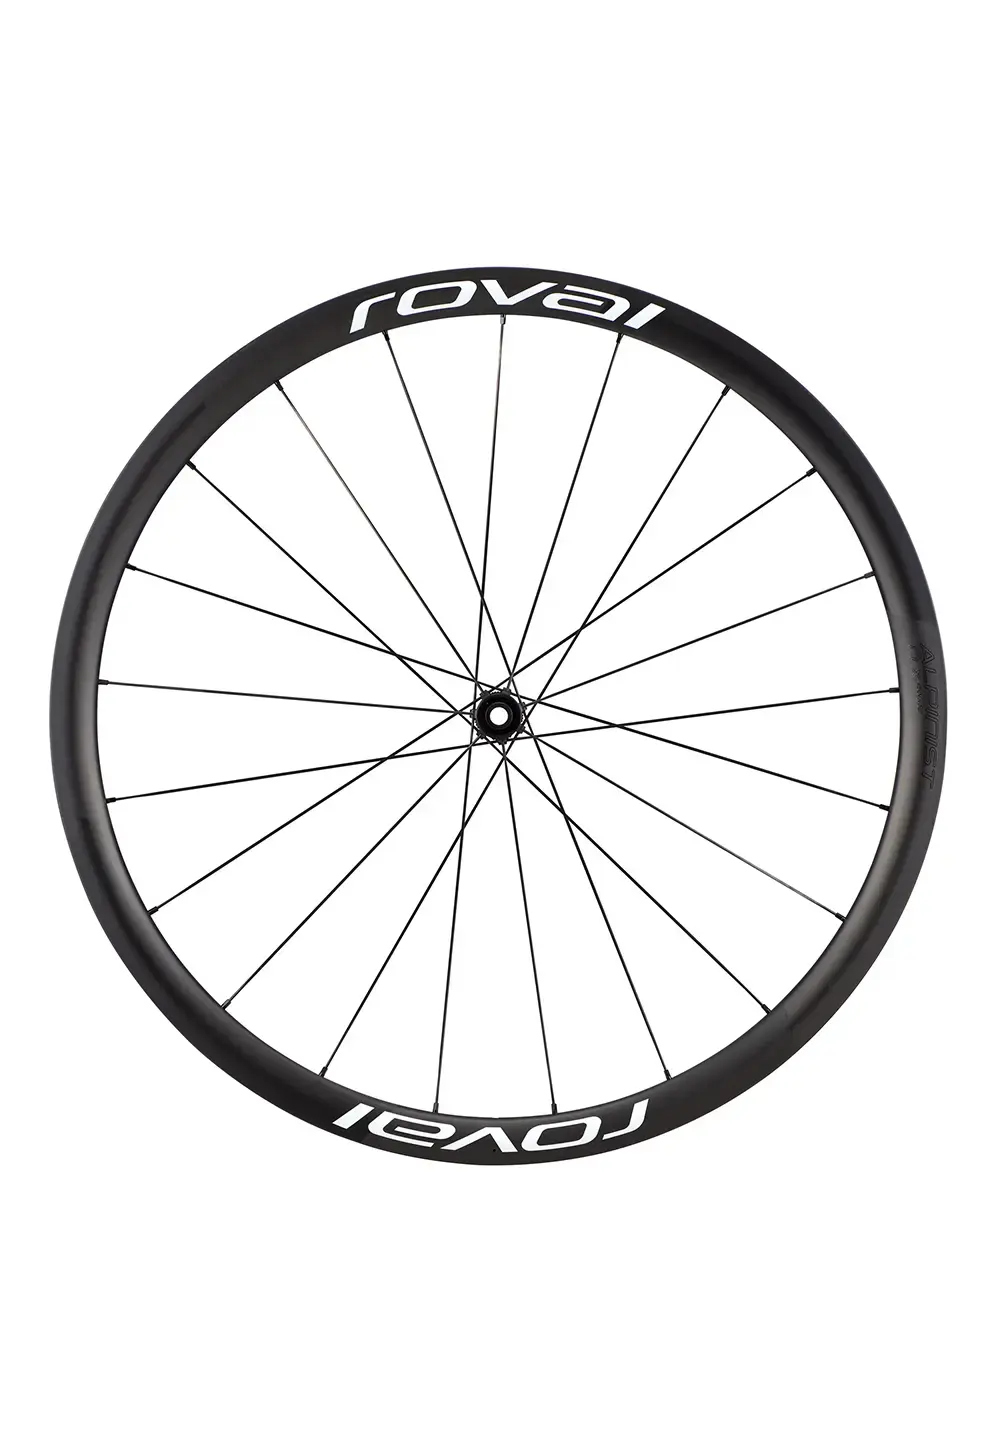 Roval Alpinist CLX II Carbon Tubeless Disc Race Voorwiel Carbon/Wit